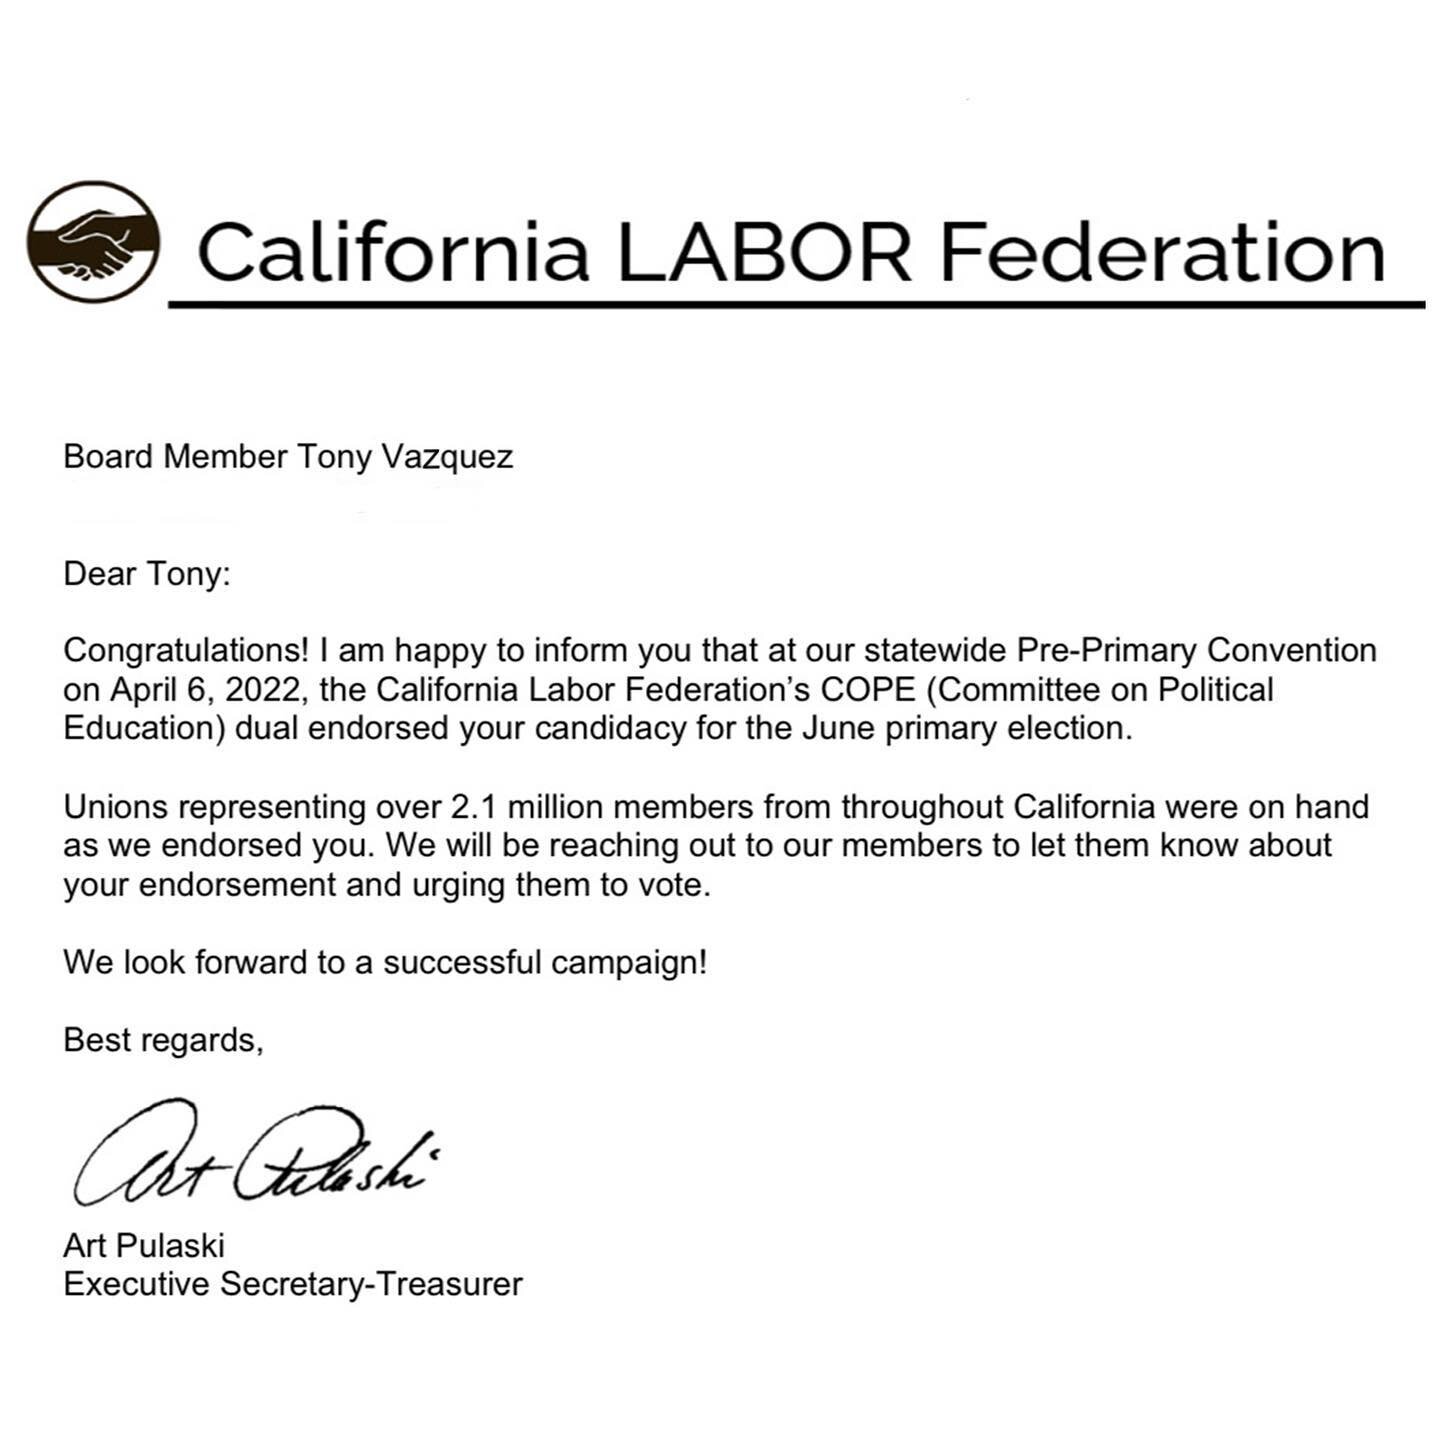 I feel honored to be endorsed by one of the largest labor organizations in the state of California and I&rsquo;m looking forward to working with @californialabor to create more affordable housing for our labor workforce. #VoteVazquez